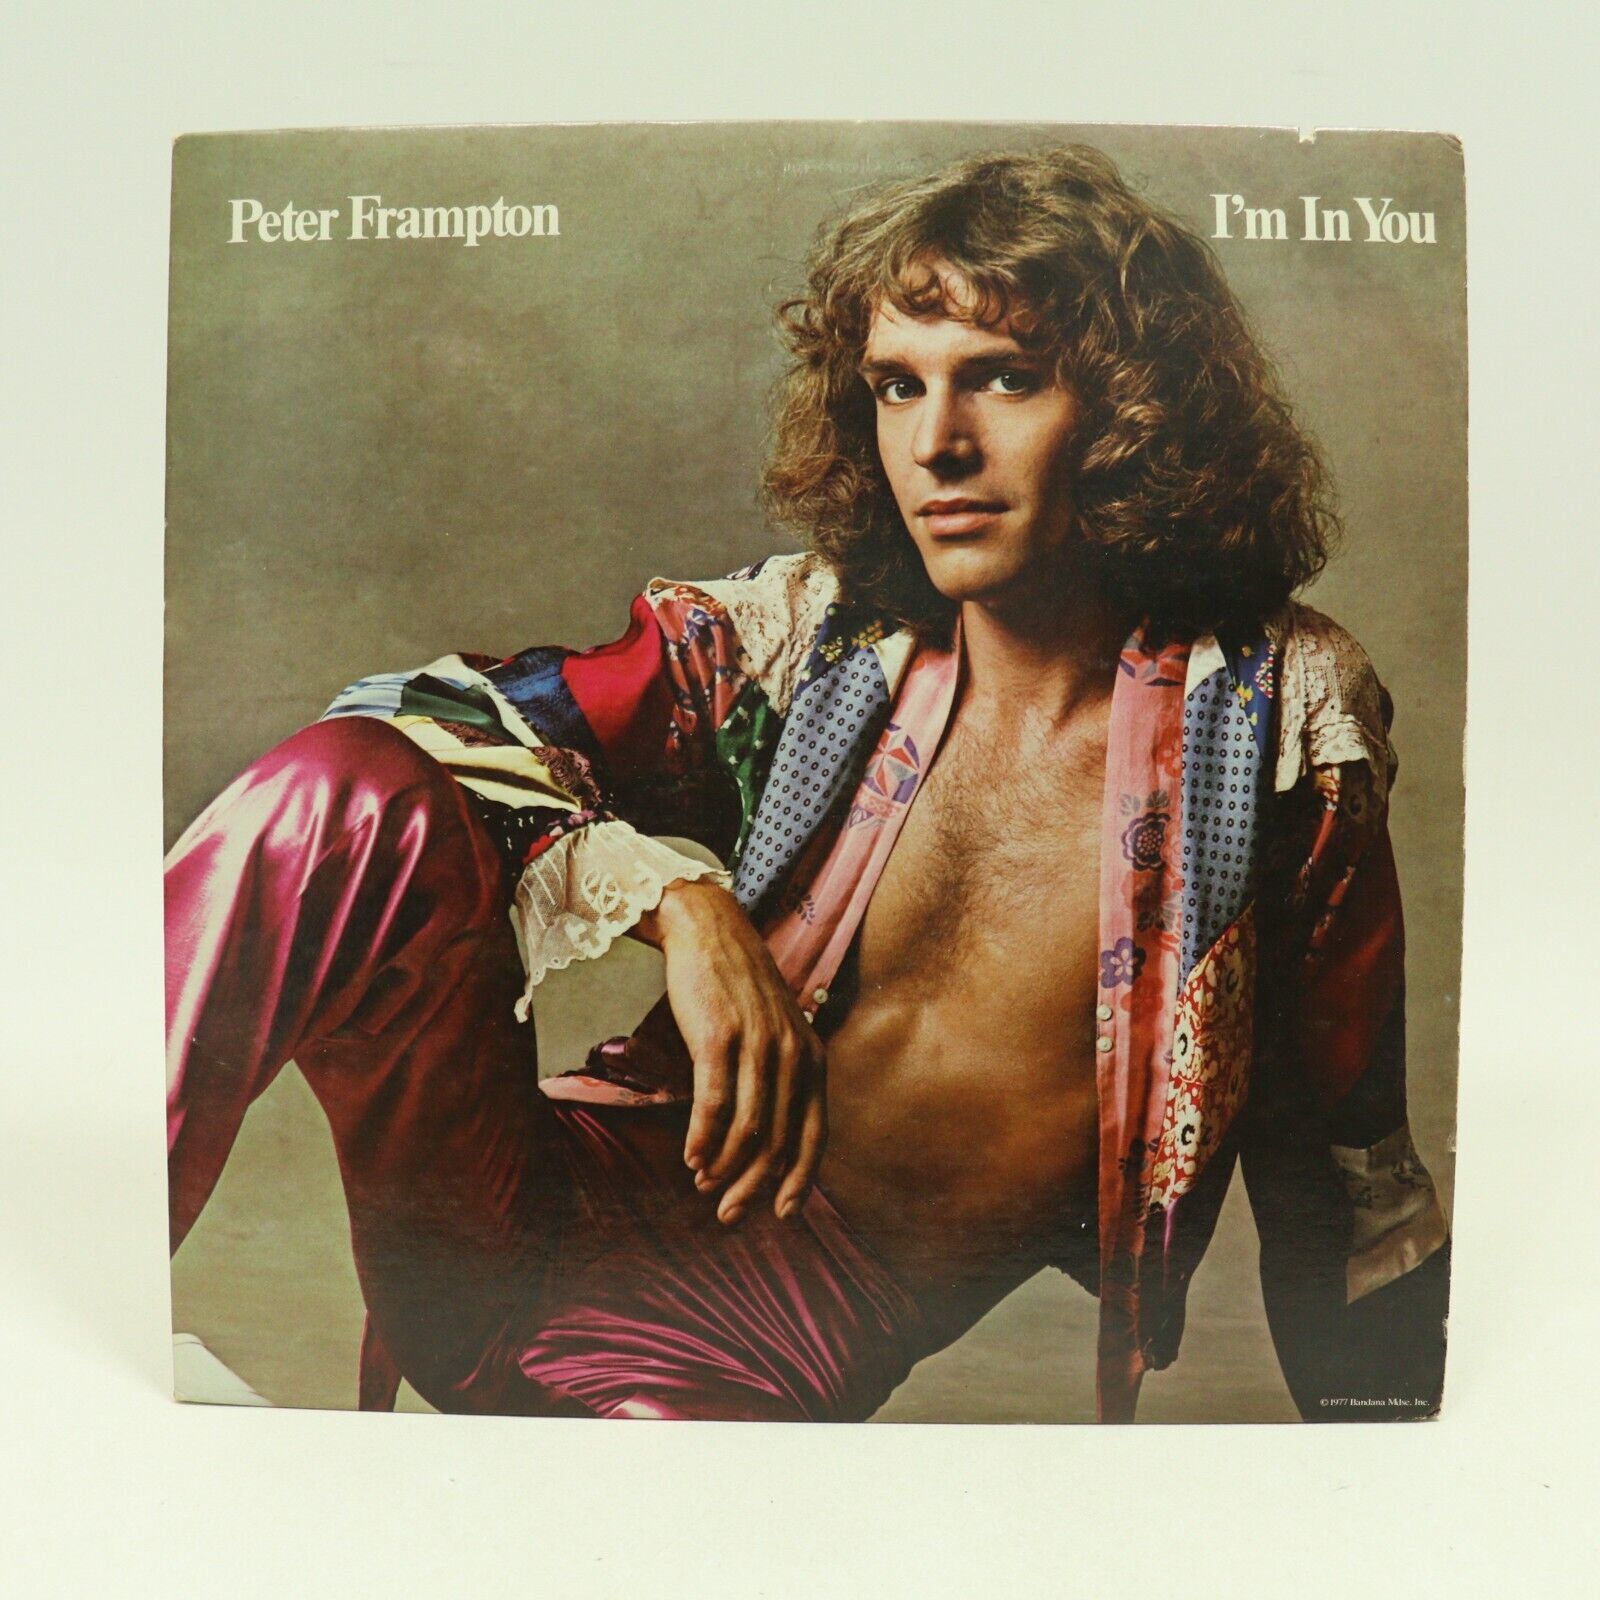 Primary image for Peter Frampton I'm In You Vinyl LP 33 Rpm A&M Records SP-4704 1977